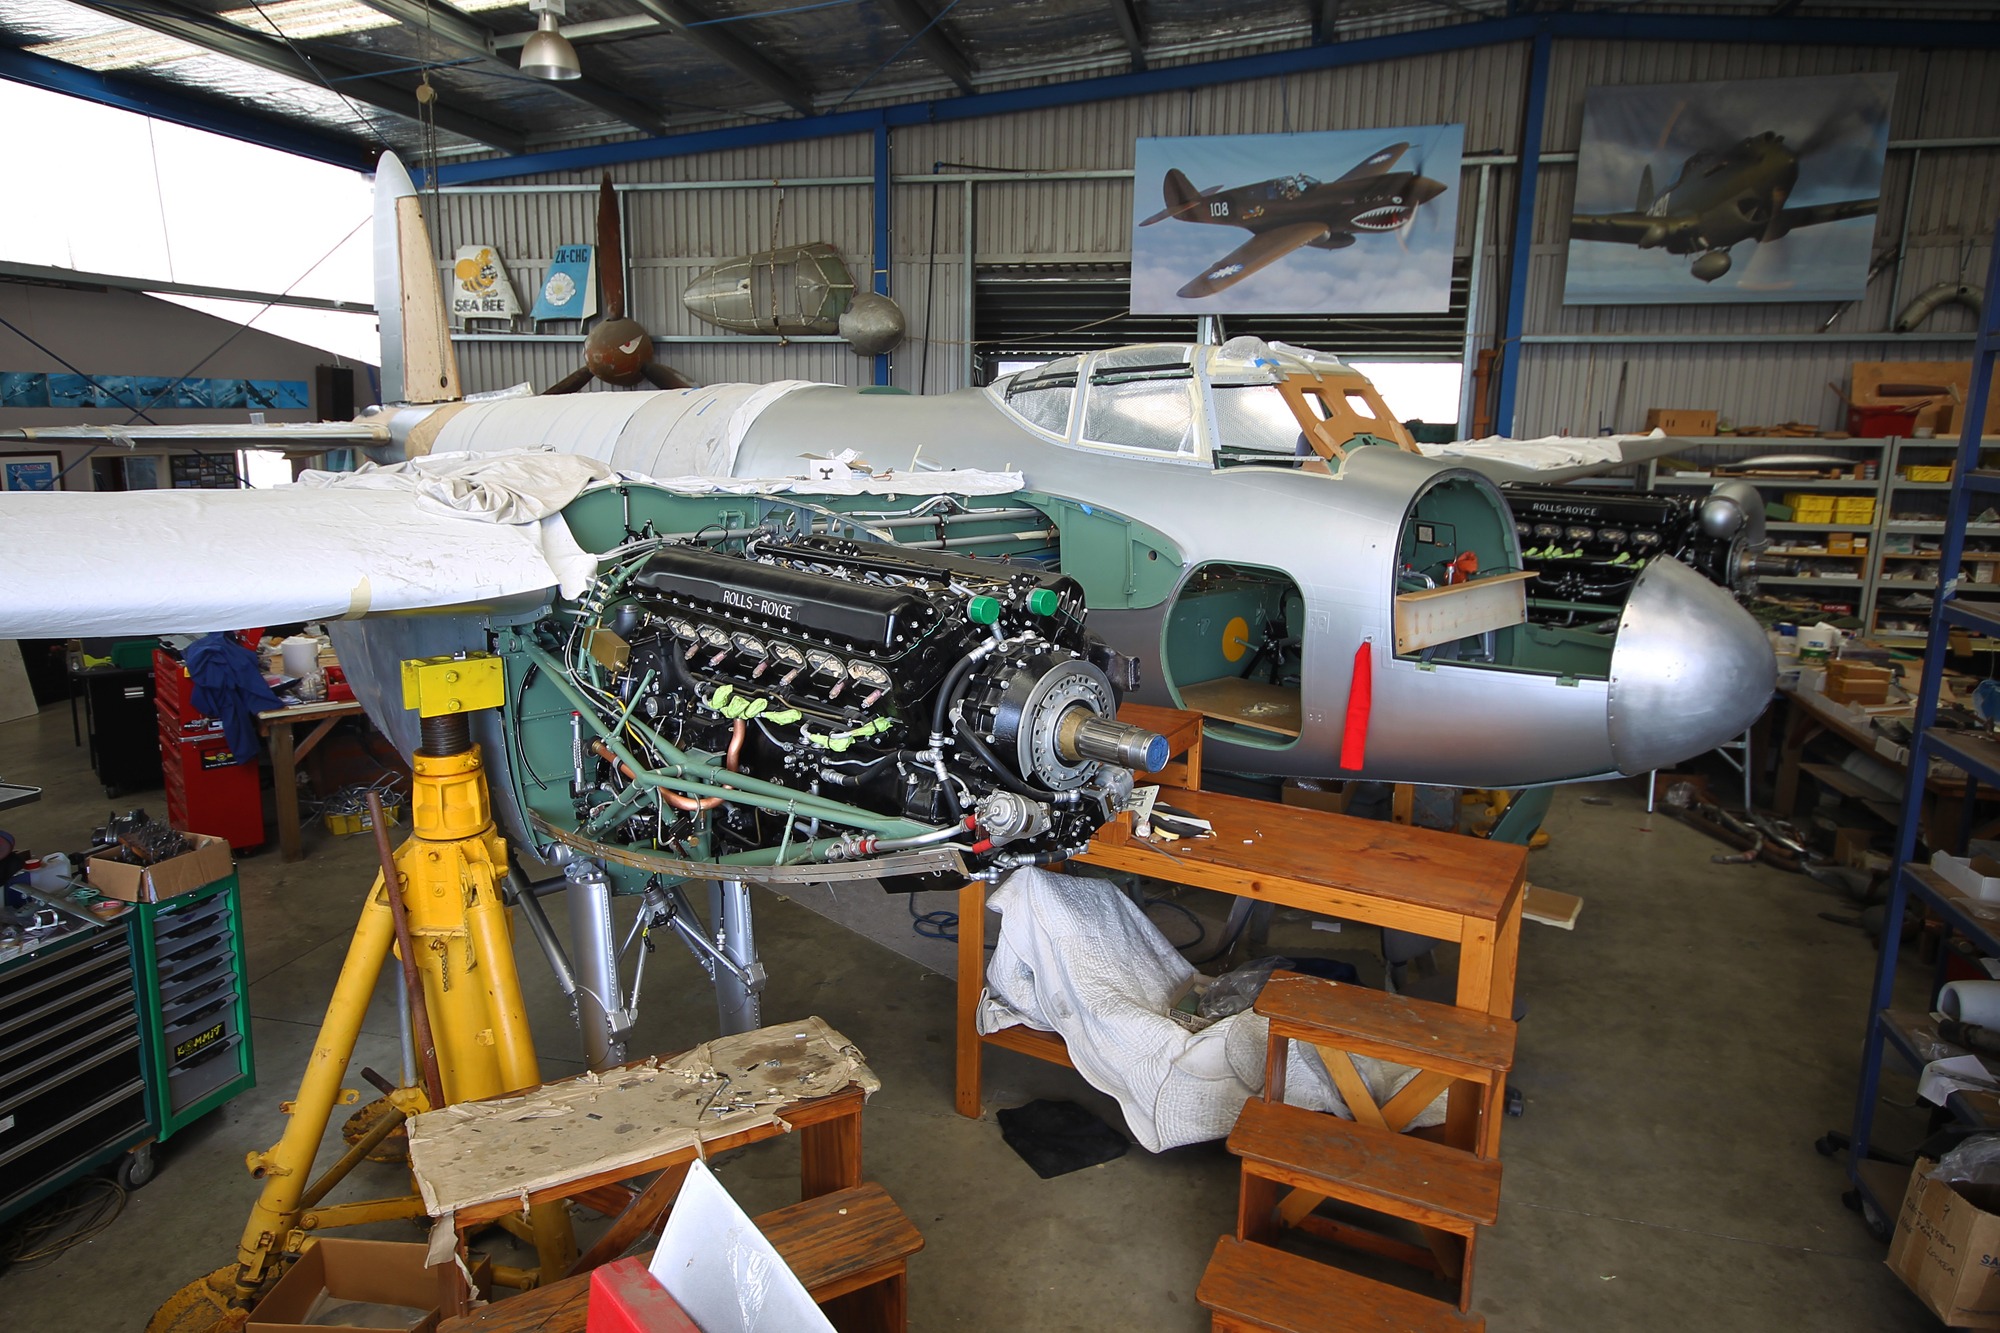 The Flying Heritage Collection’s de Havilland Mosquito is nearing completion at a restoration facility in New Zealand.